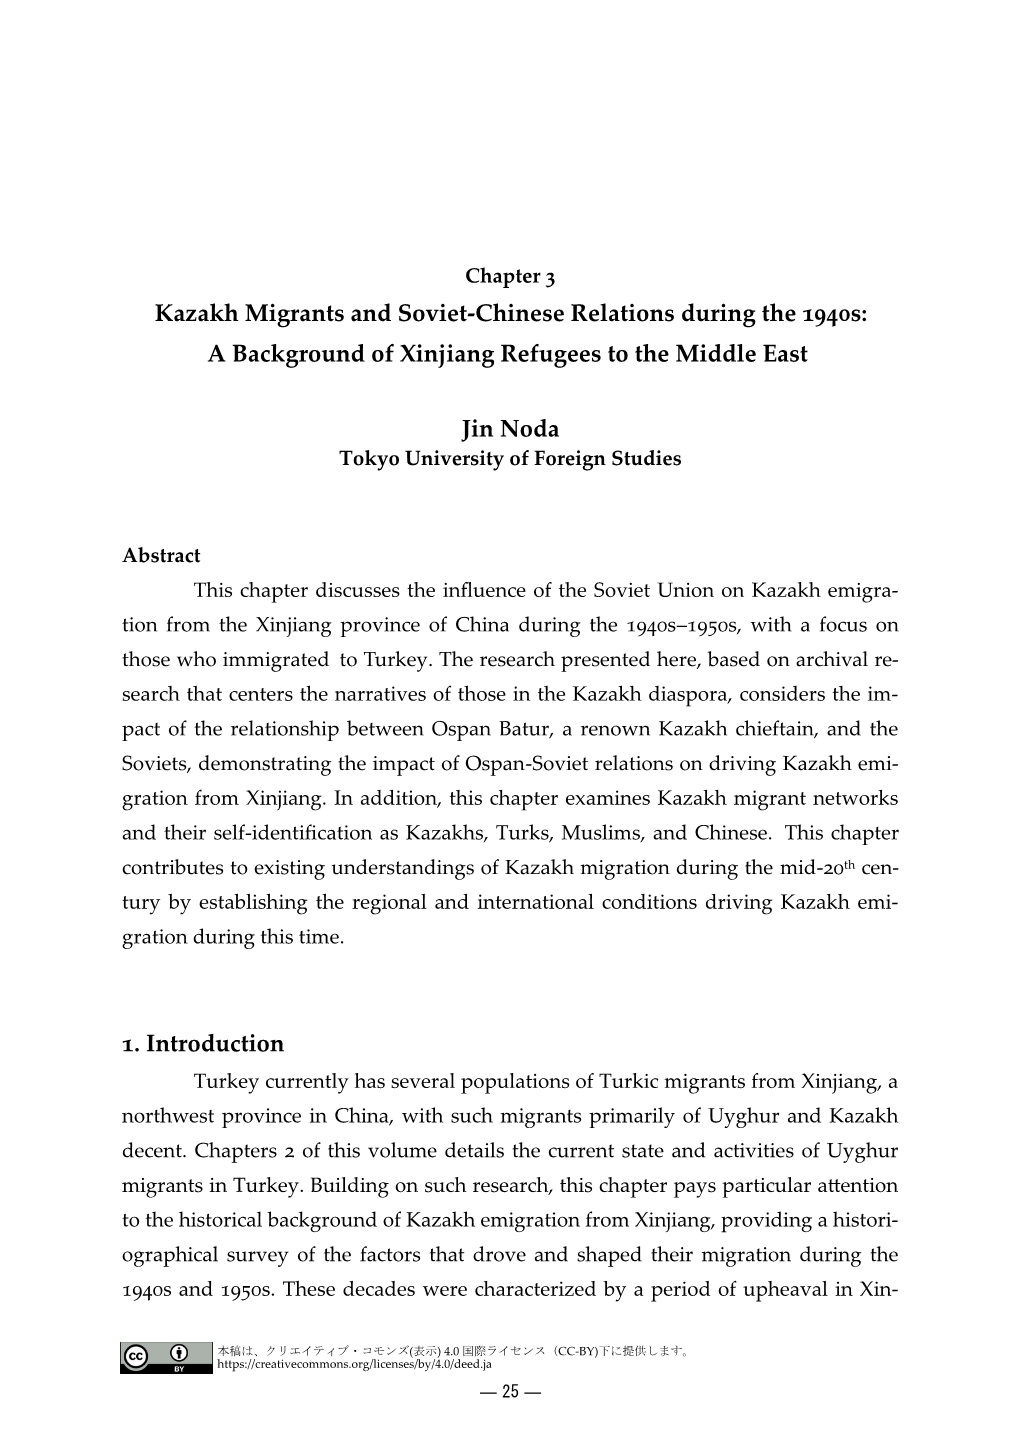 Kazakh Migrants and Soviet-Chinese Relations During the 1940S: a Background of Xinjiang Refugees to the Middle East